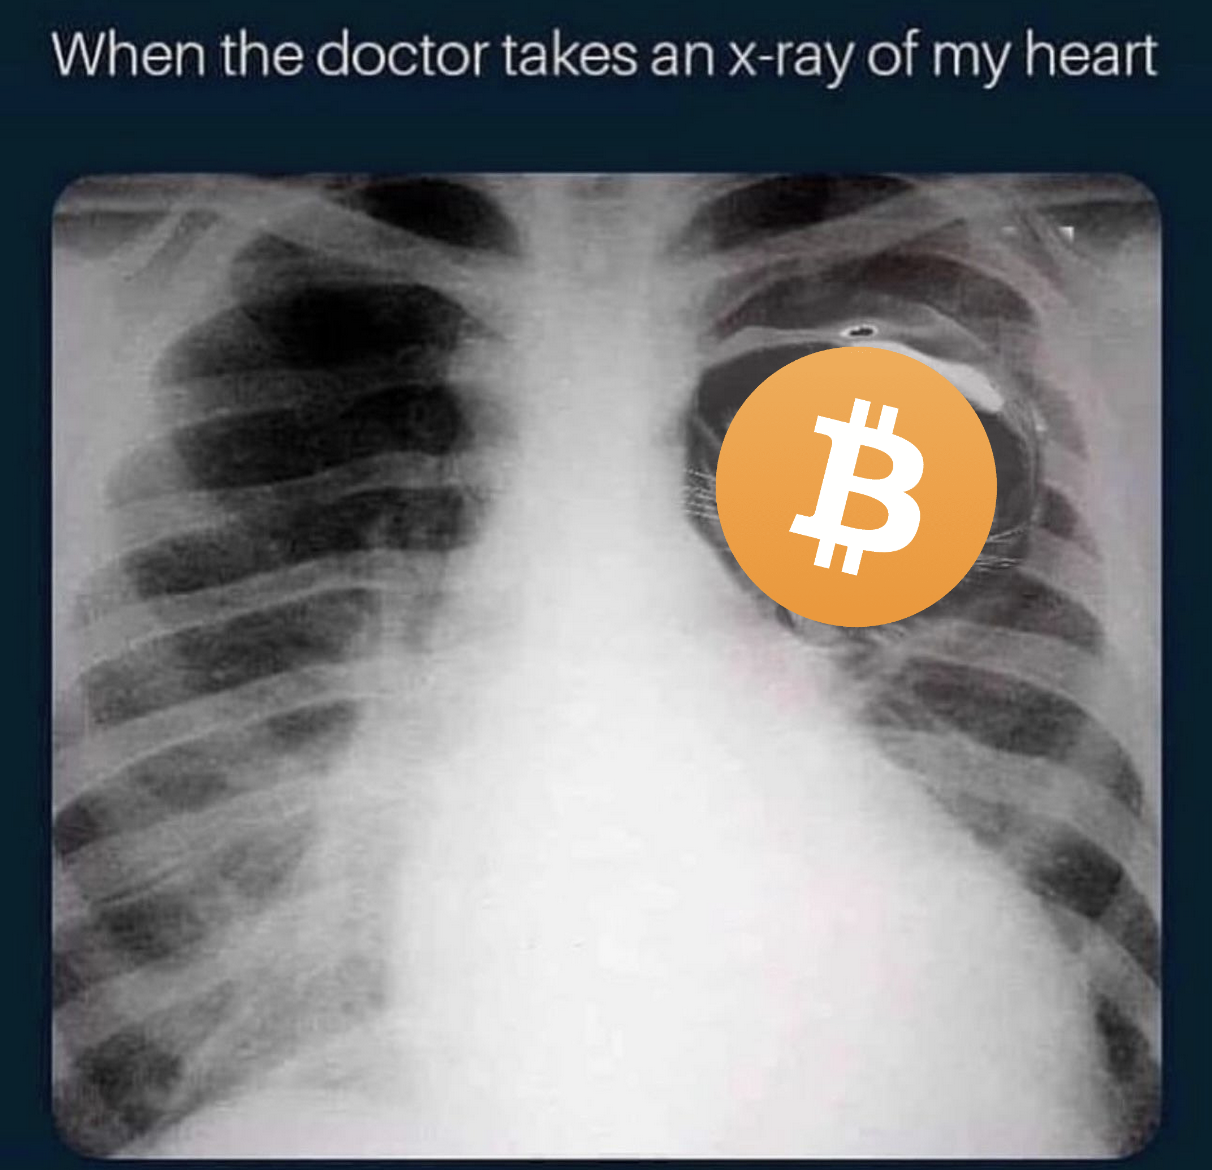 When the doctor takes an x-ray of my heart